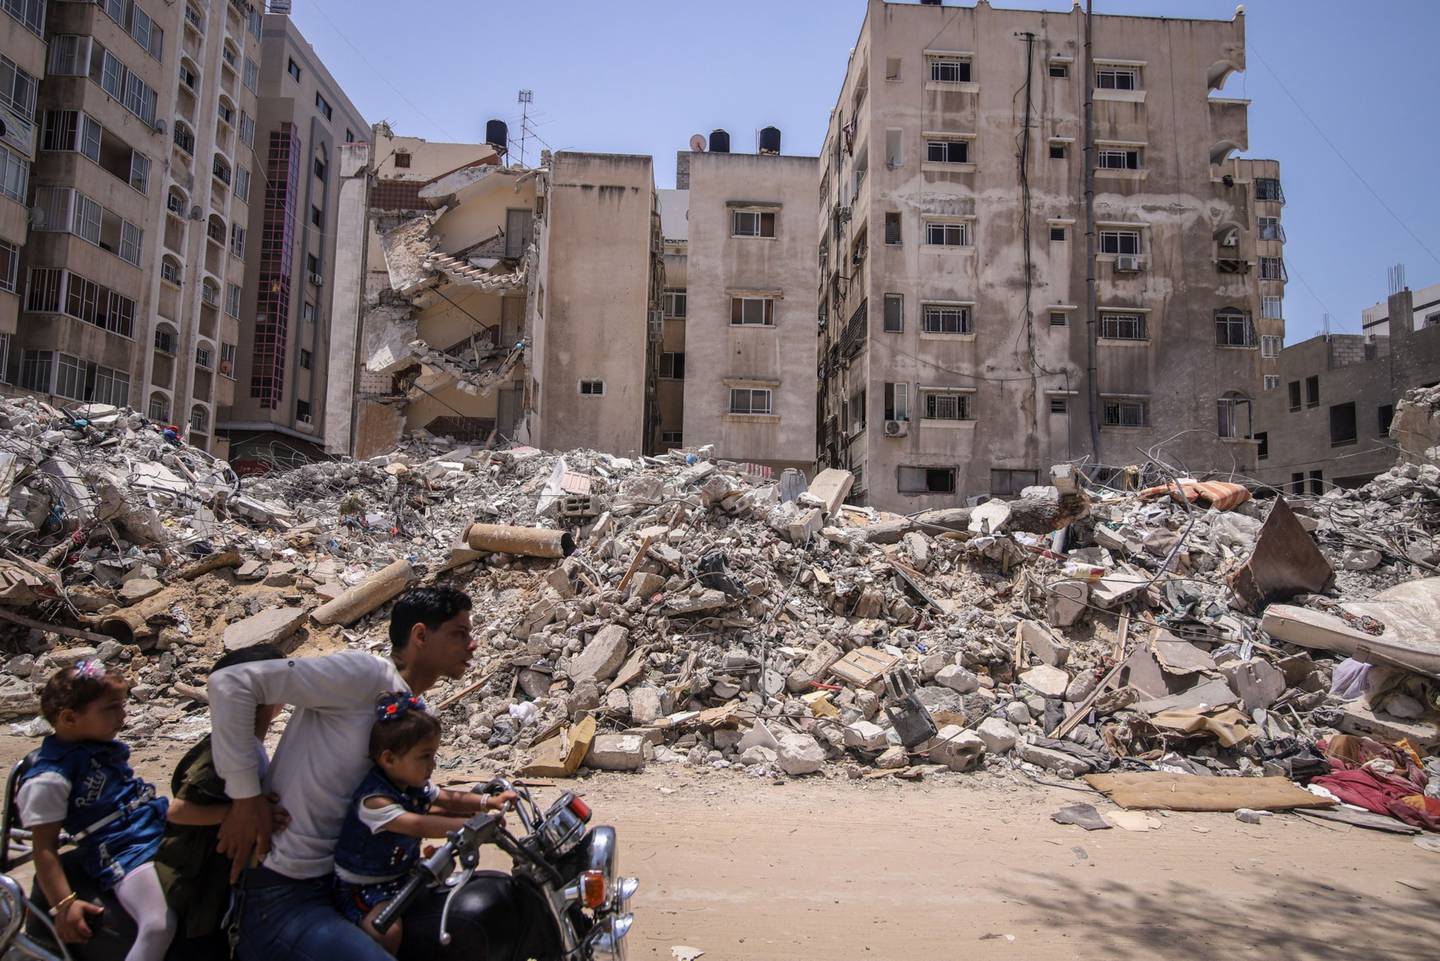 A motorcyclist drives children past flattened residential buildings in Gaza City on May 21.